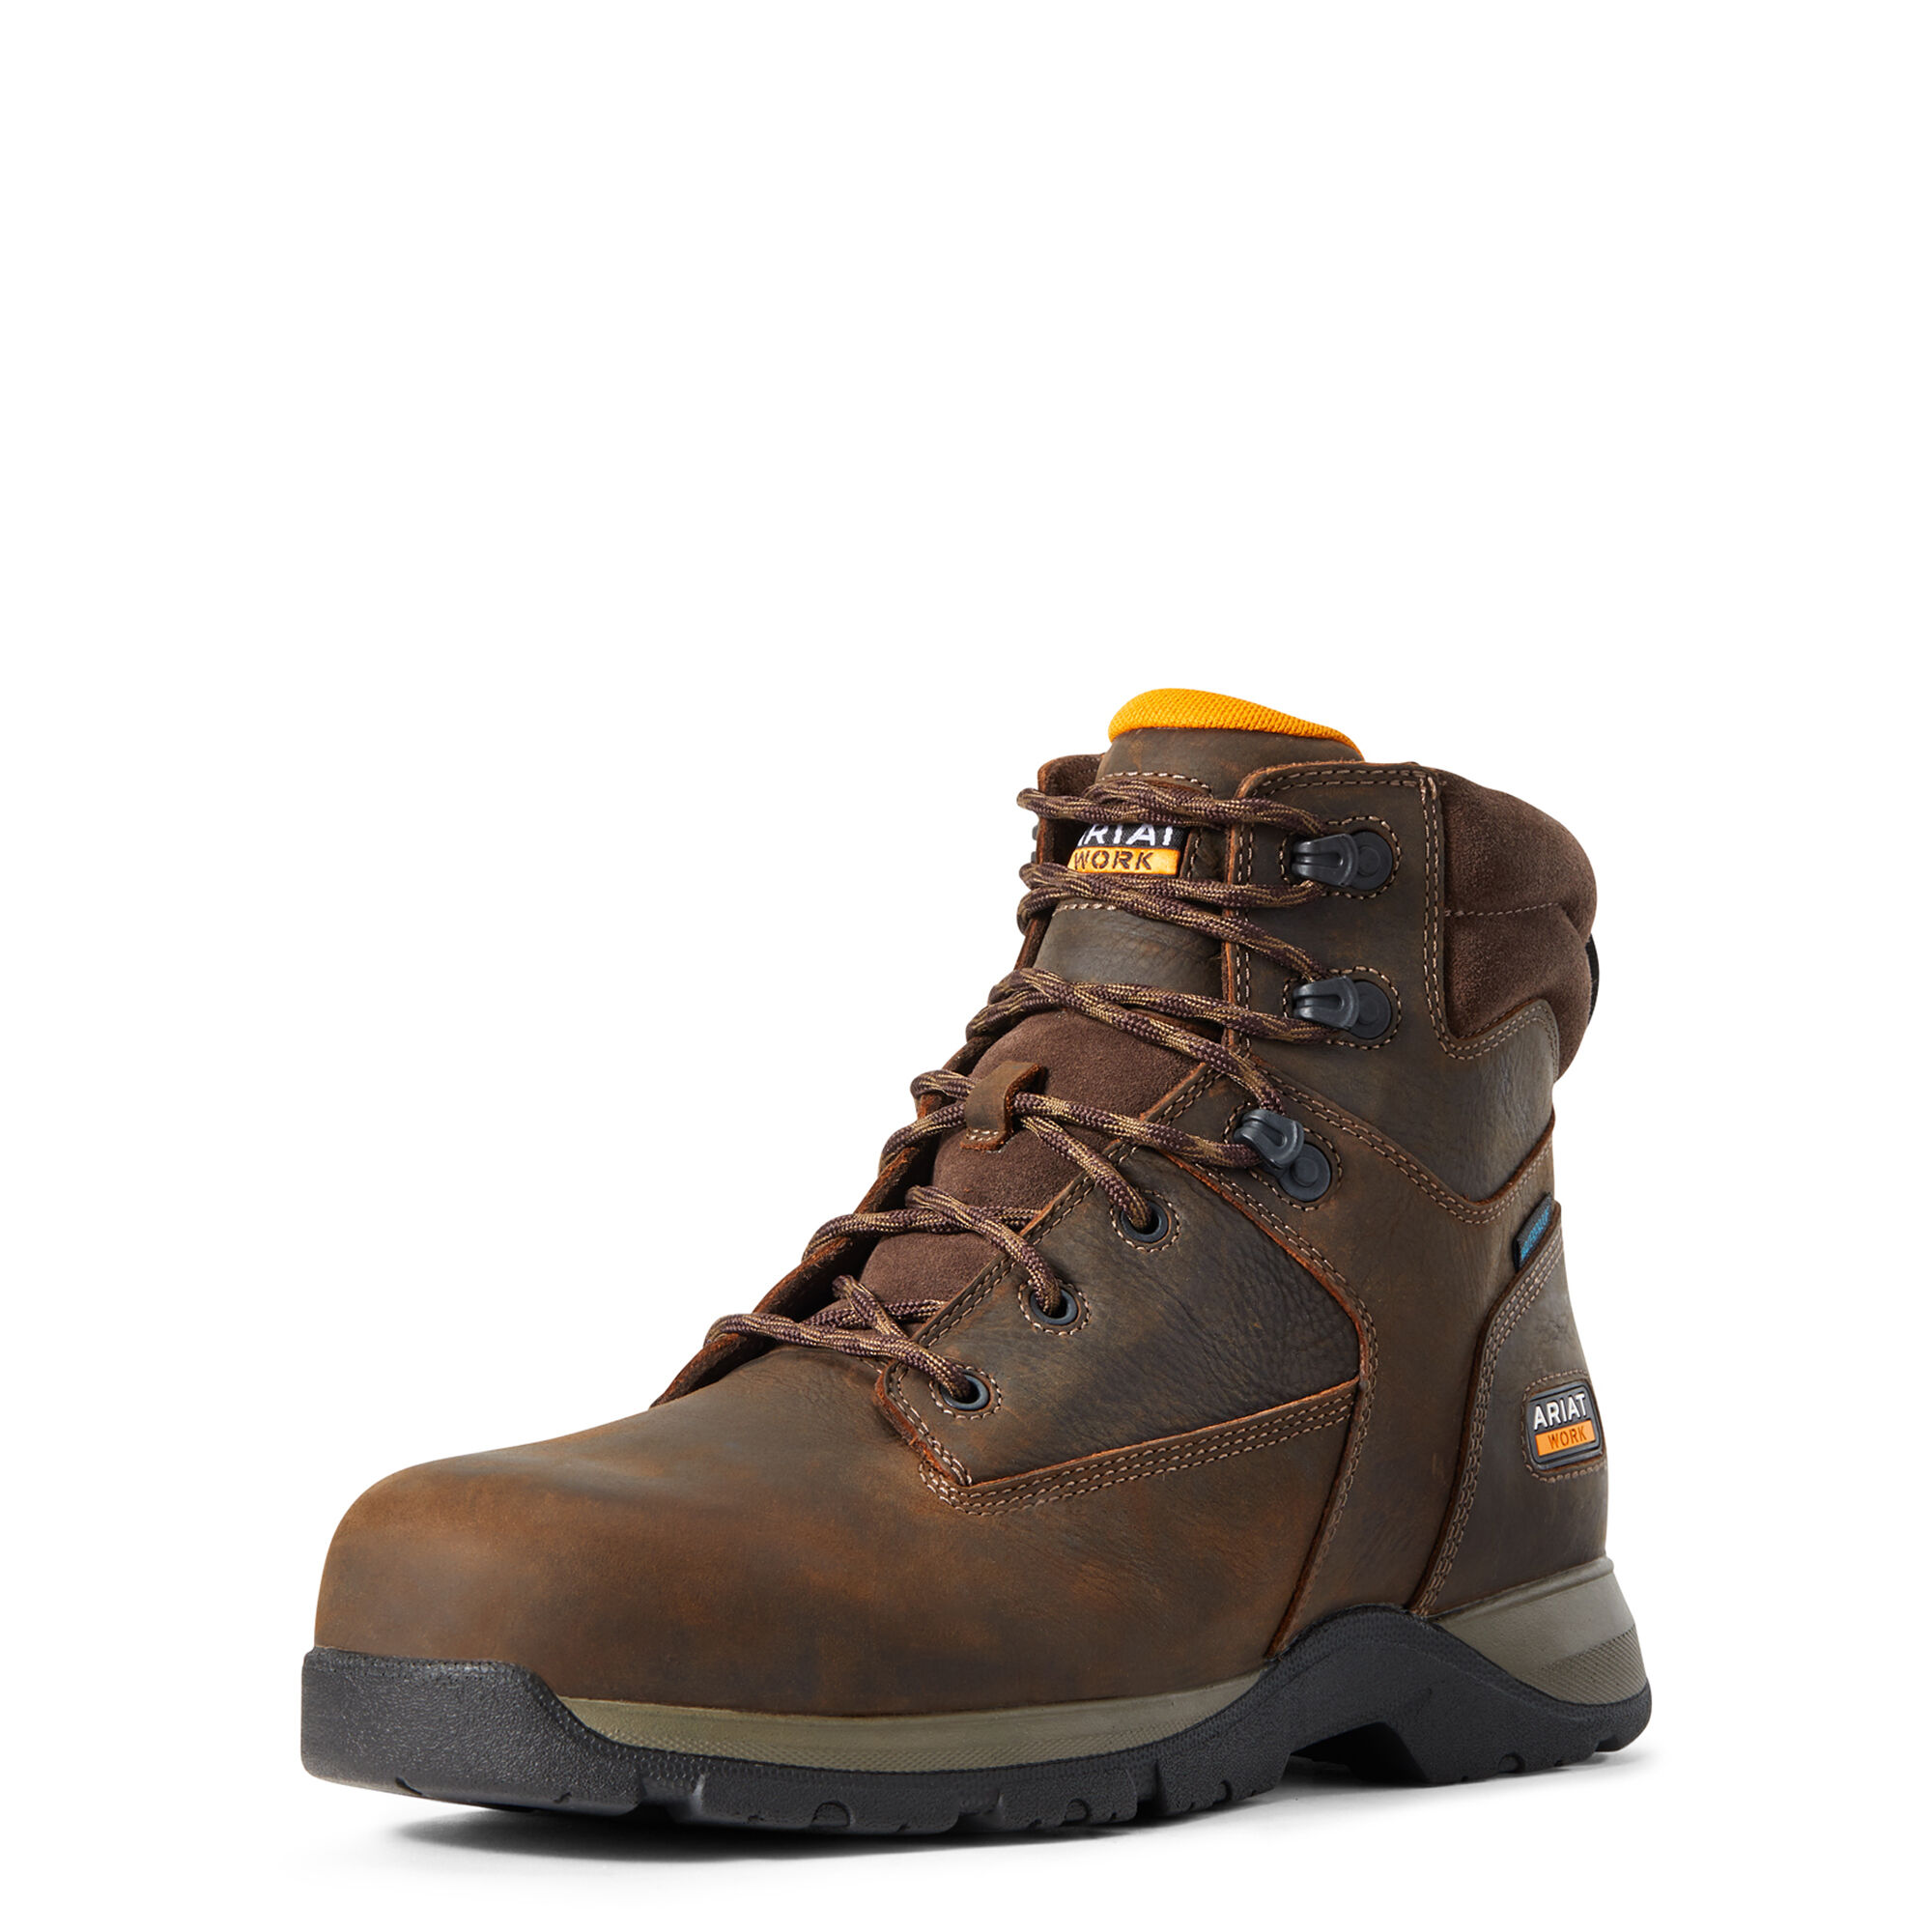 Men's Work Boots Clearance | Ariat